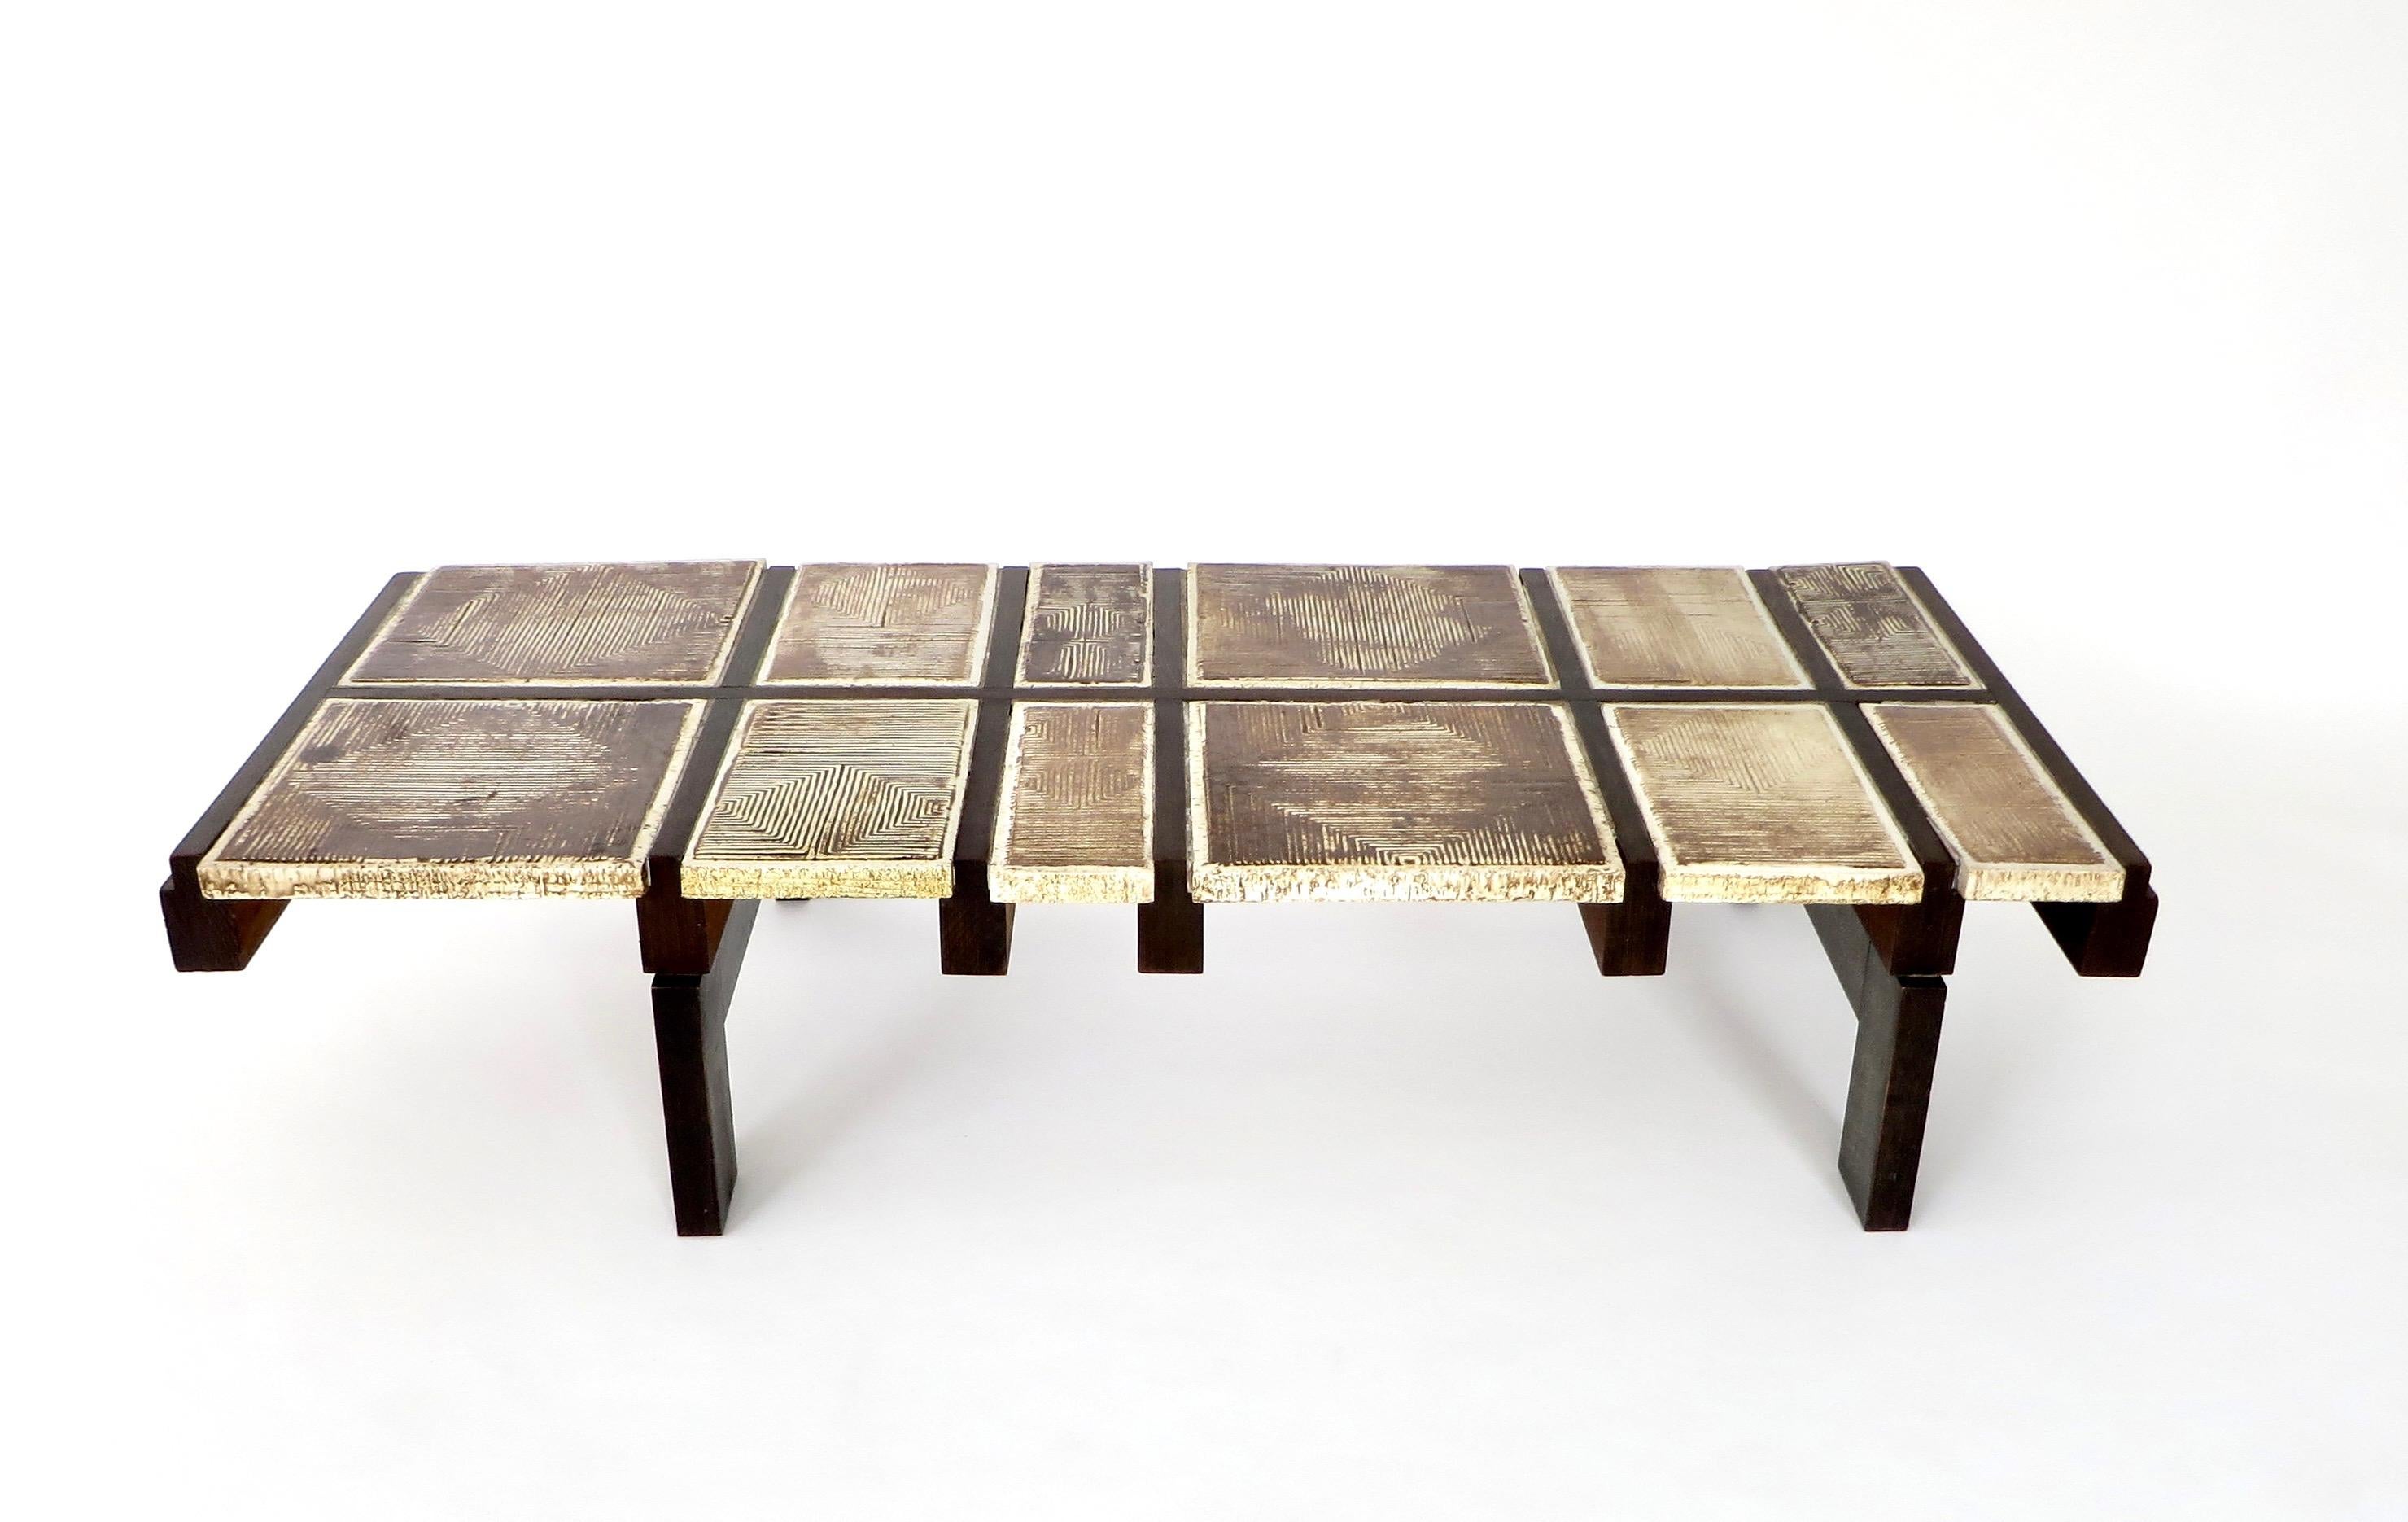 A ceramic tile coffee table by Roger Capron, model Alouette, 1970-1971.
This rare coffee table from one of the masters of ceramics and ceramic tile coffee tables from Vallauris is composed of heavily scraffito tiles on a dark wood base.
It is